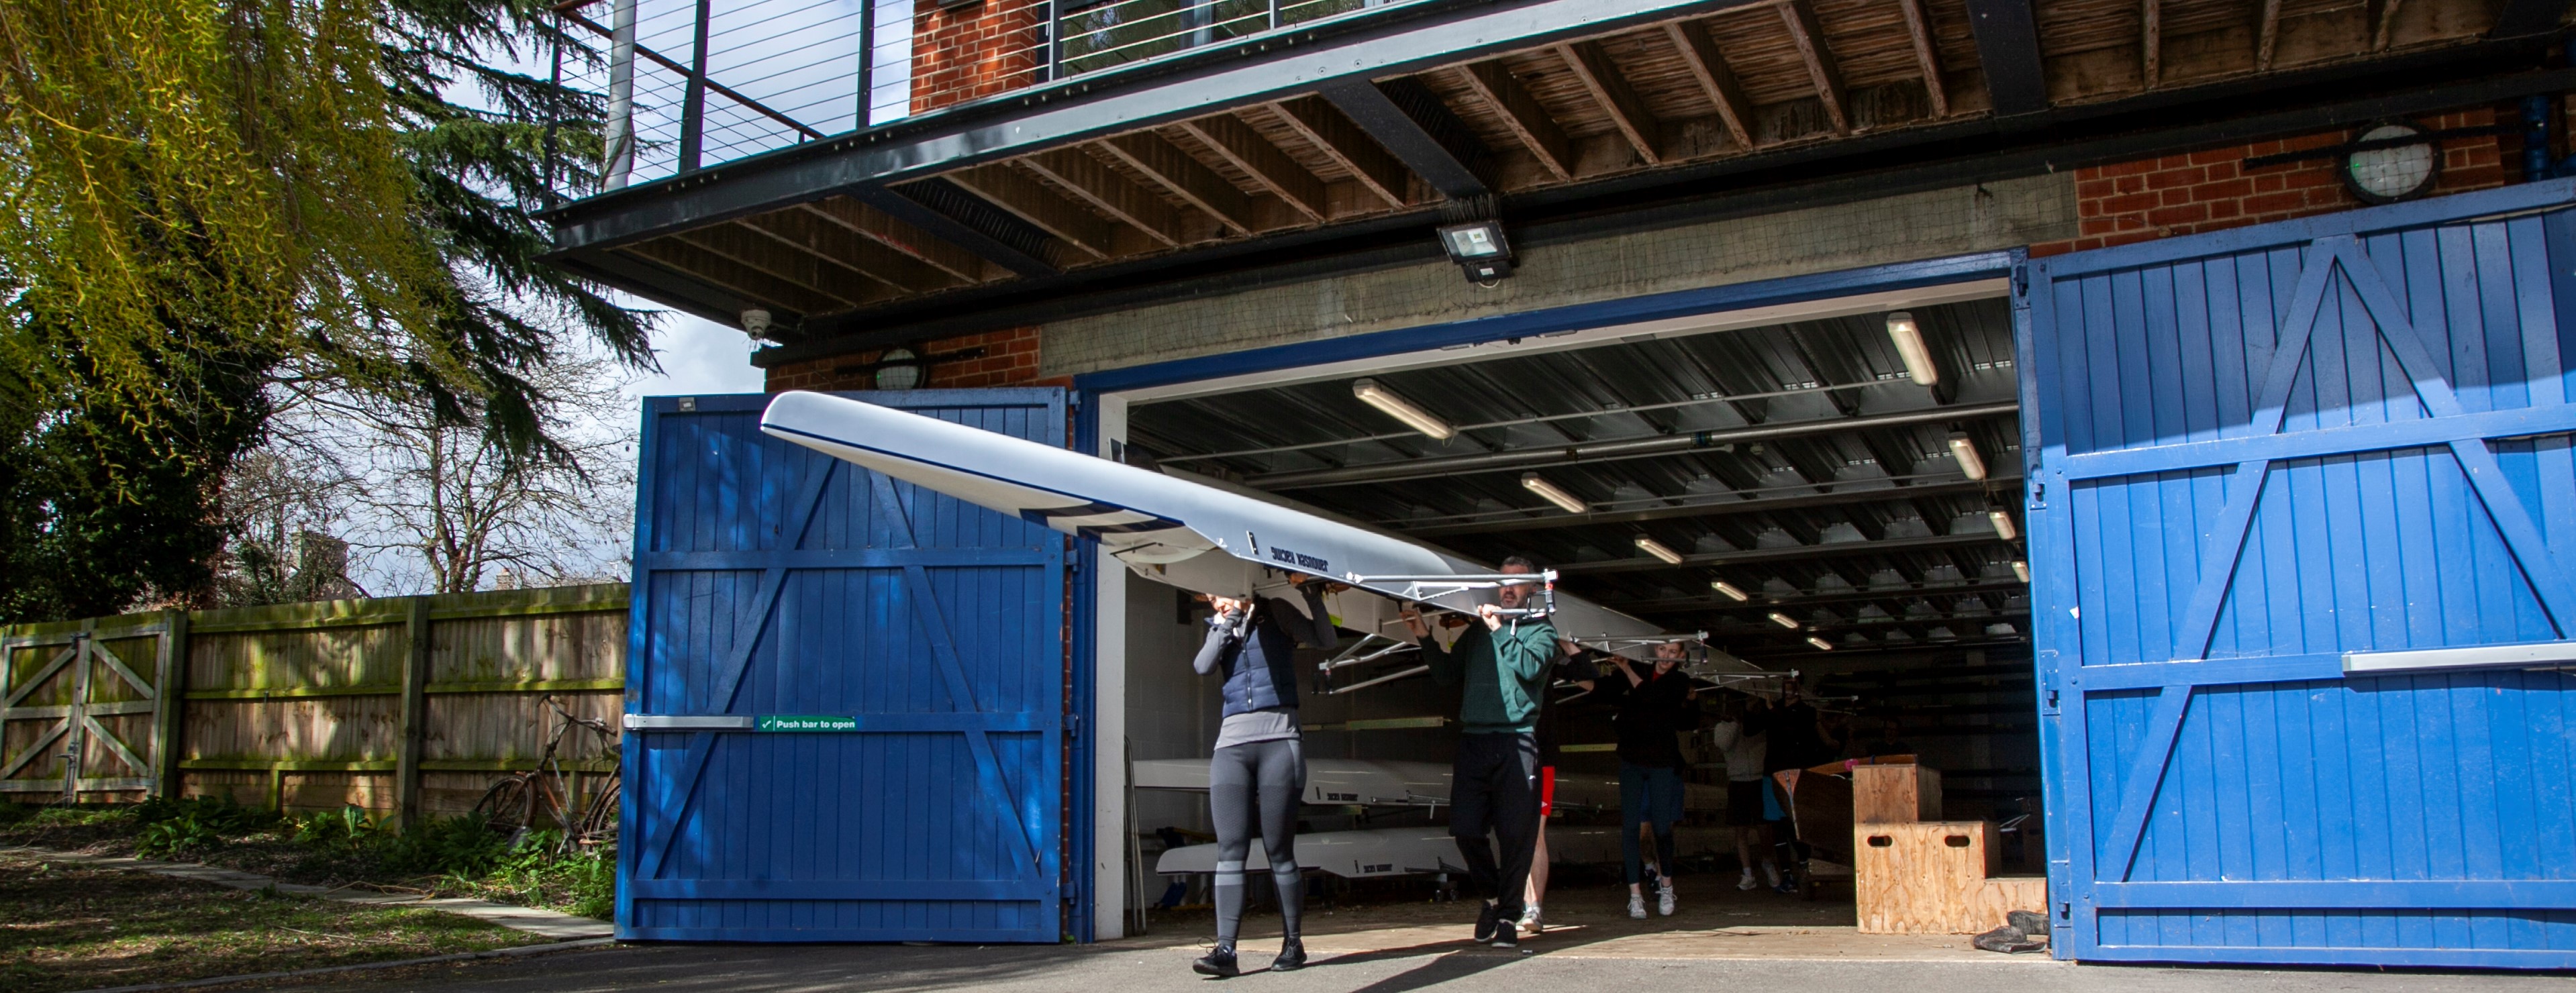 Boat being carried out of the boathouse